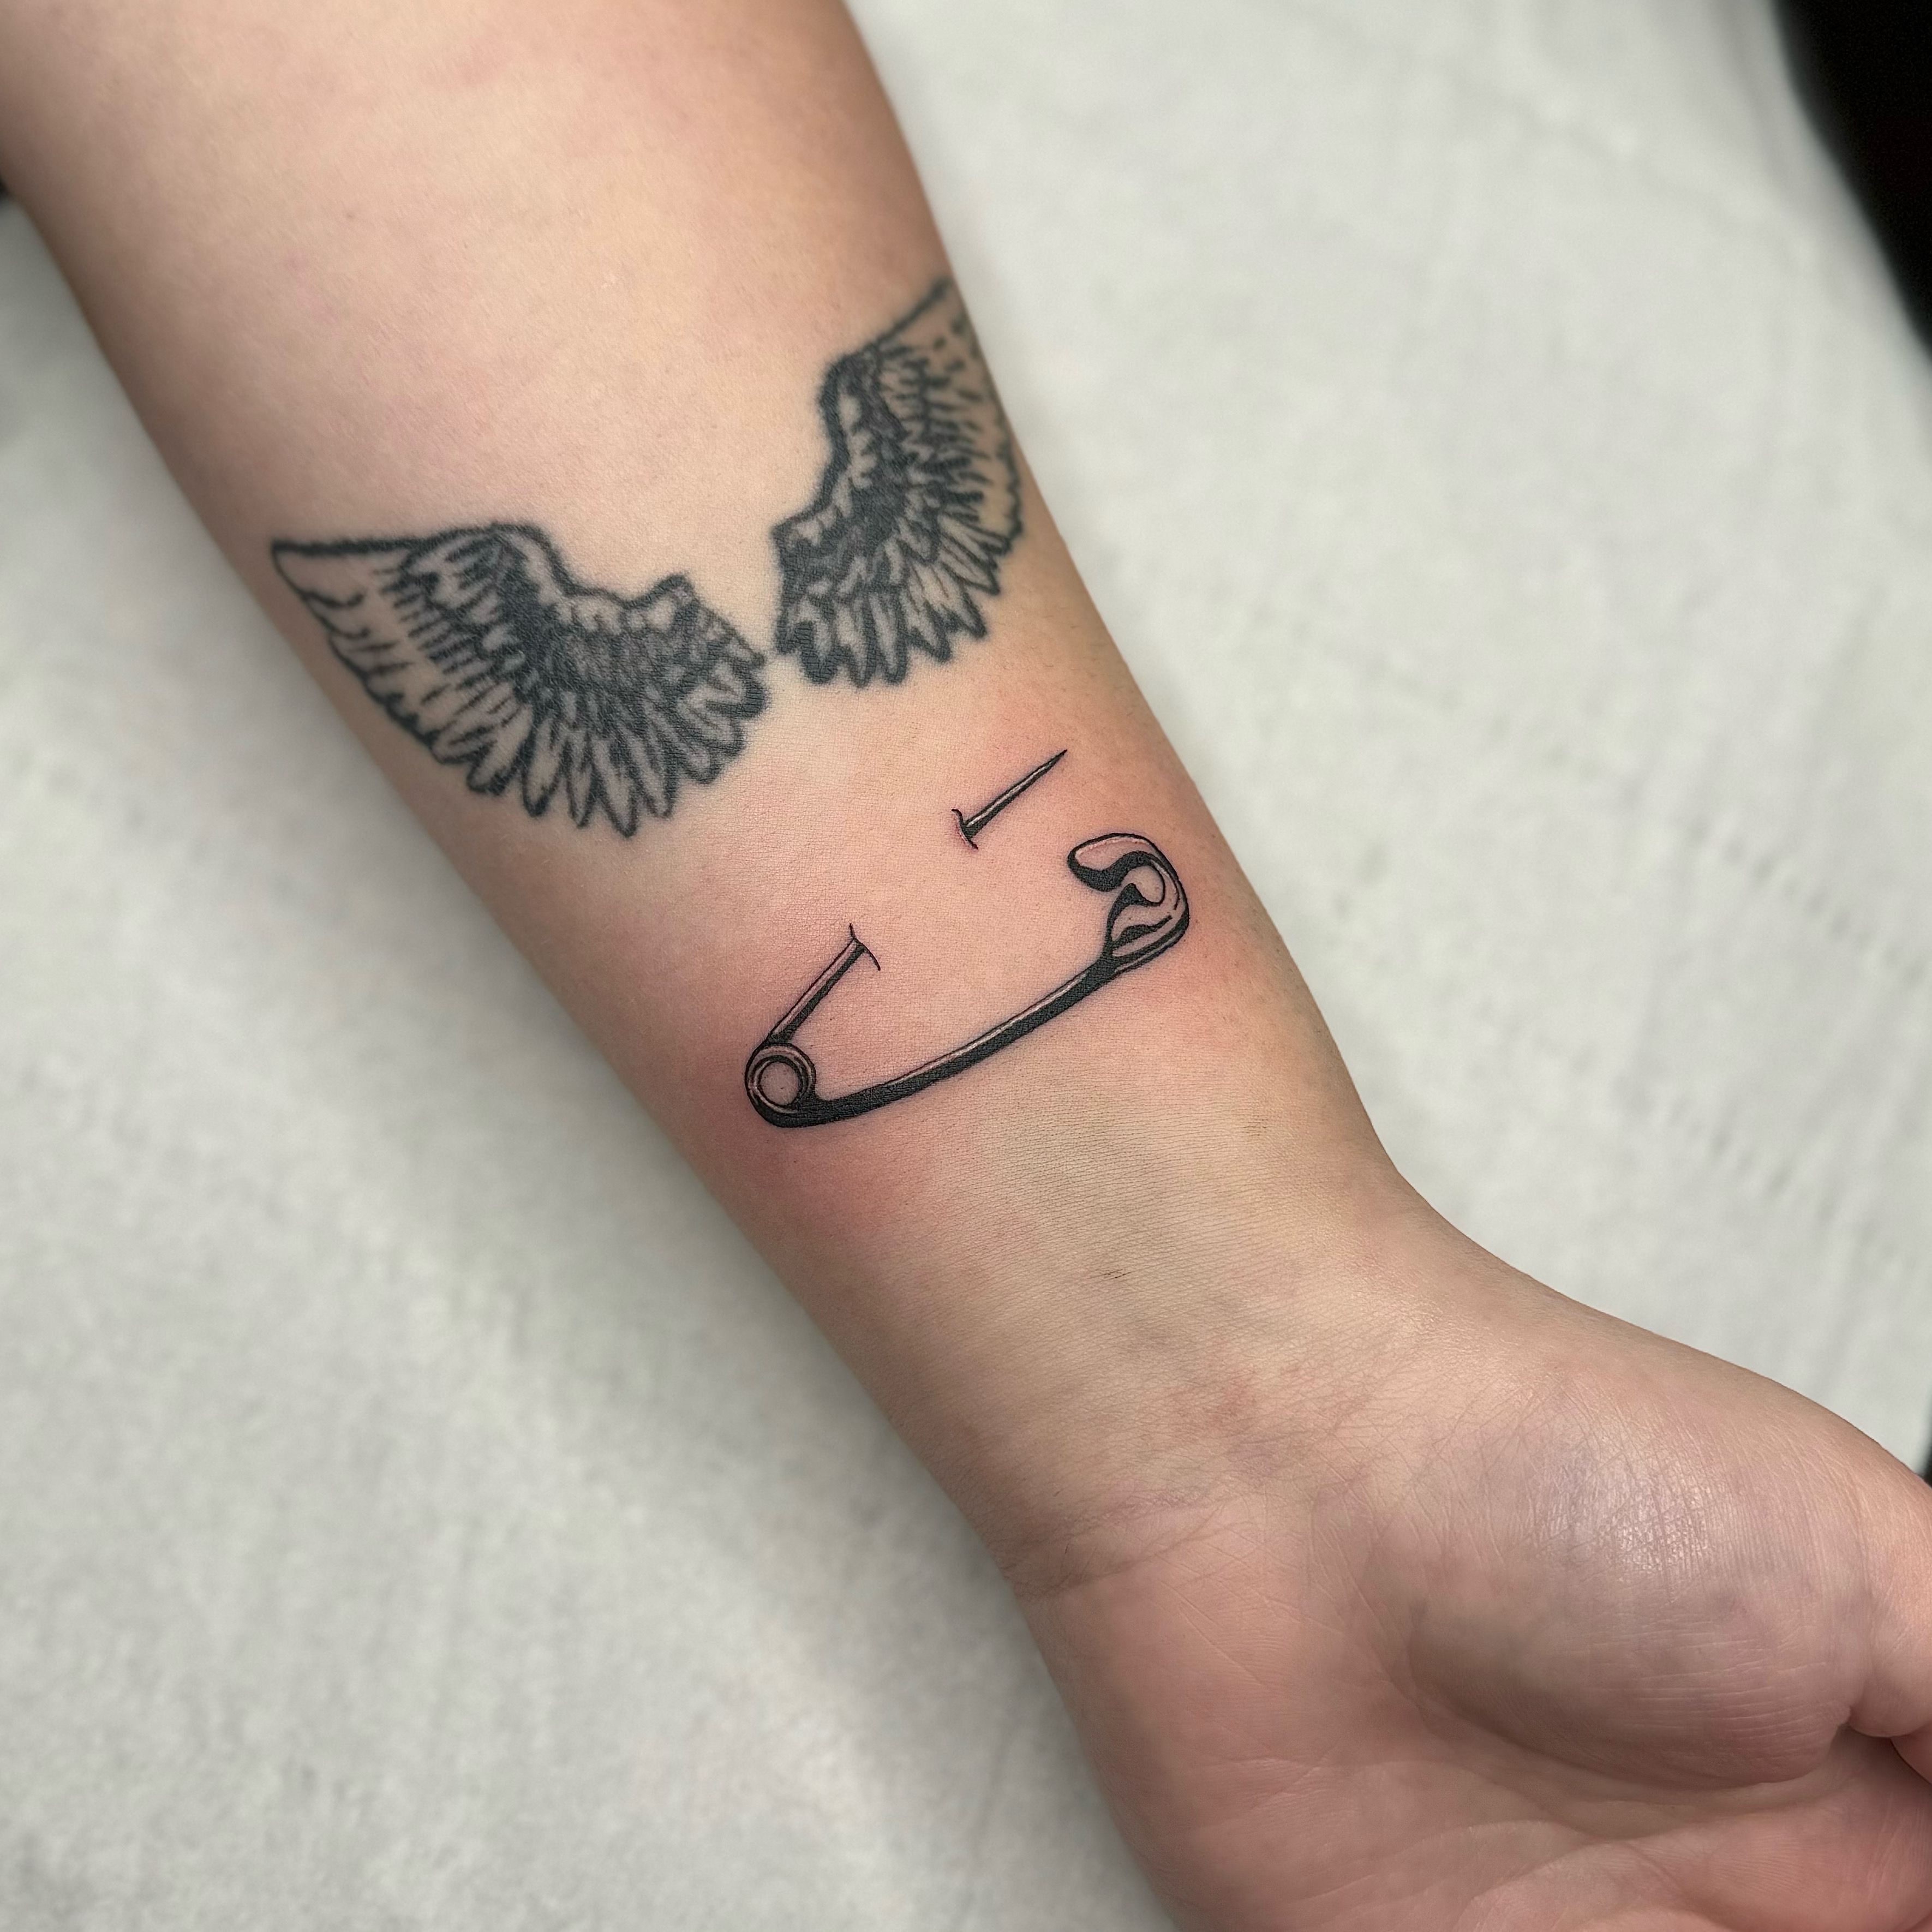 Unique and Meaningful Safety Pin Tattoo Ideas